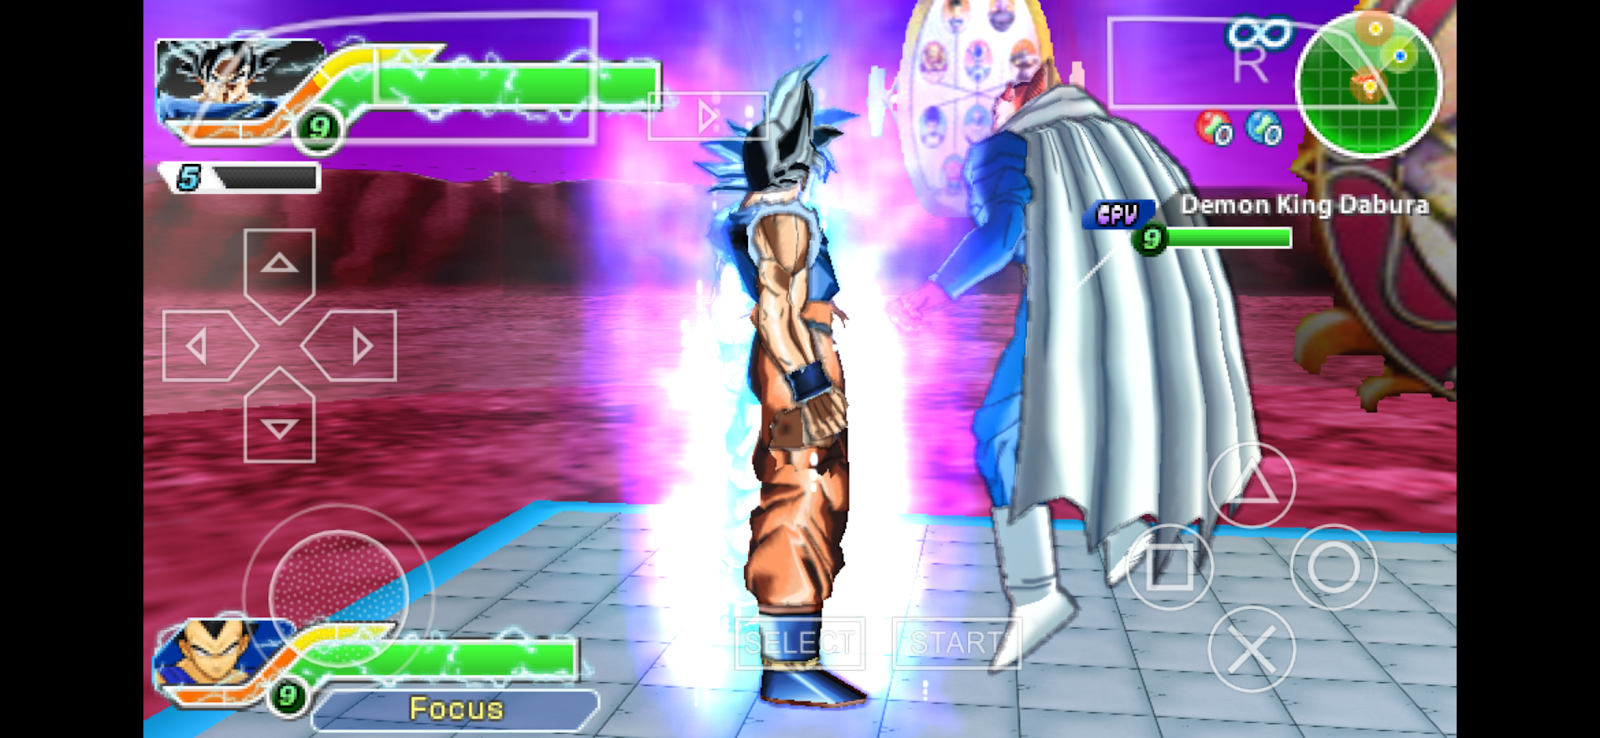 Dragon Ball Xenoverse Psp Iso On Android All In One Gamer